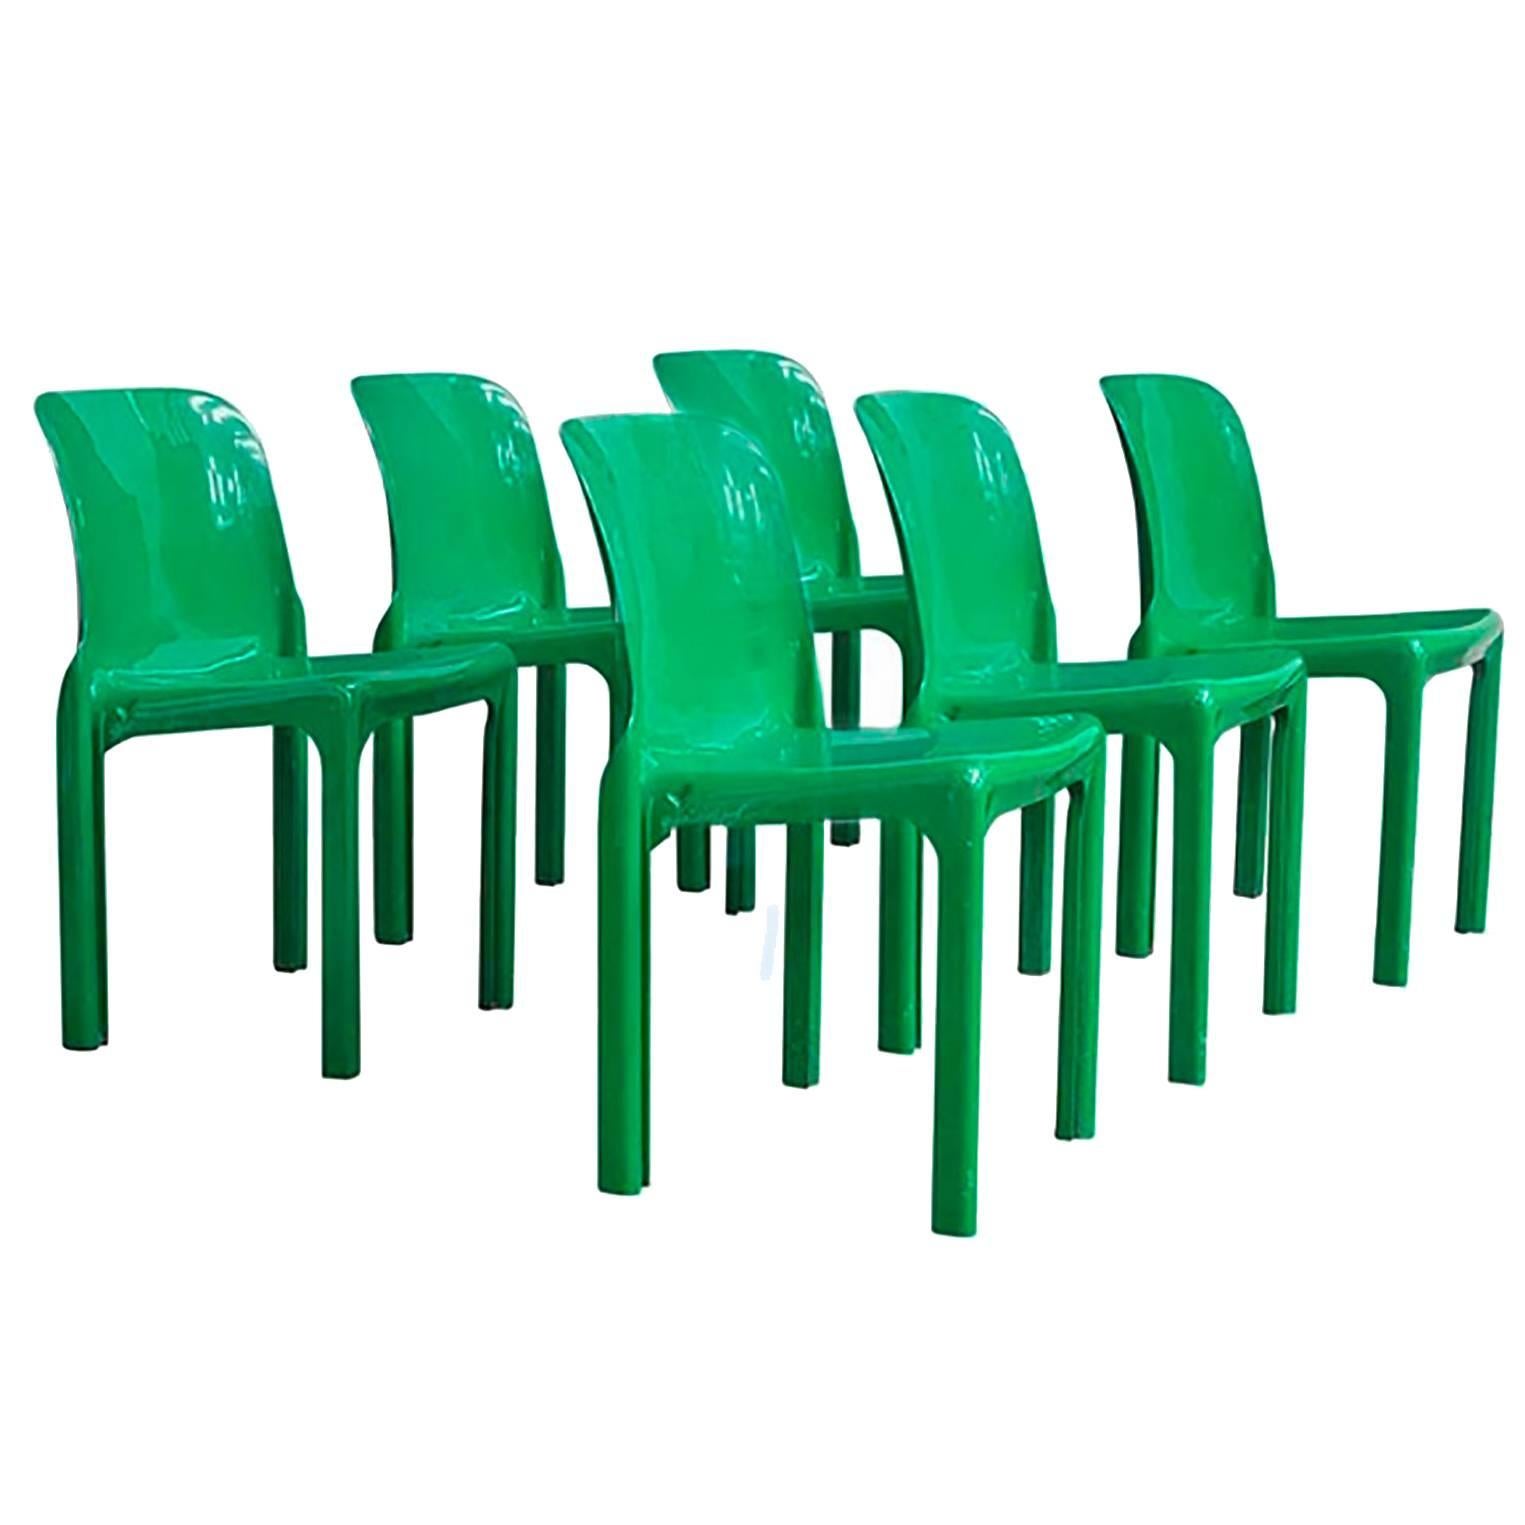 1969, Vico Magistretti for Artemide, Set of Four or Six Green Selene Chairs